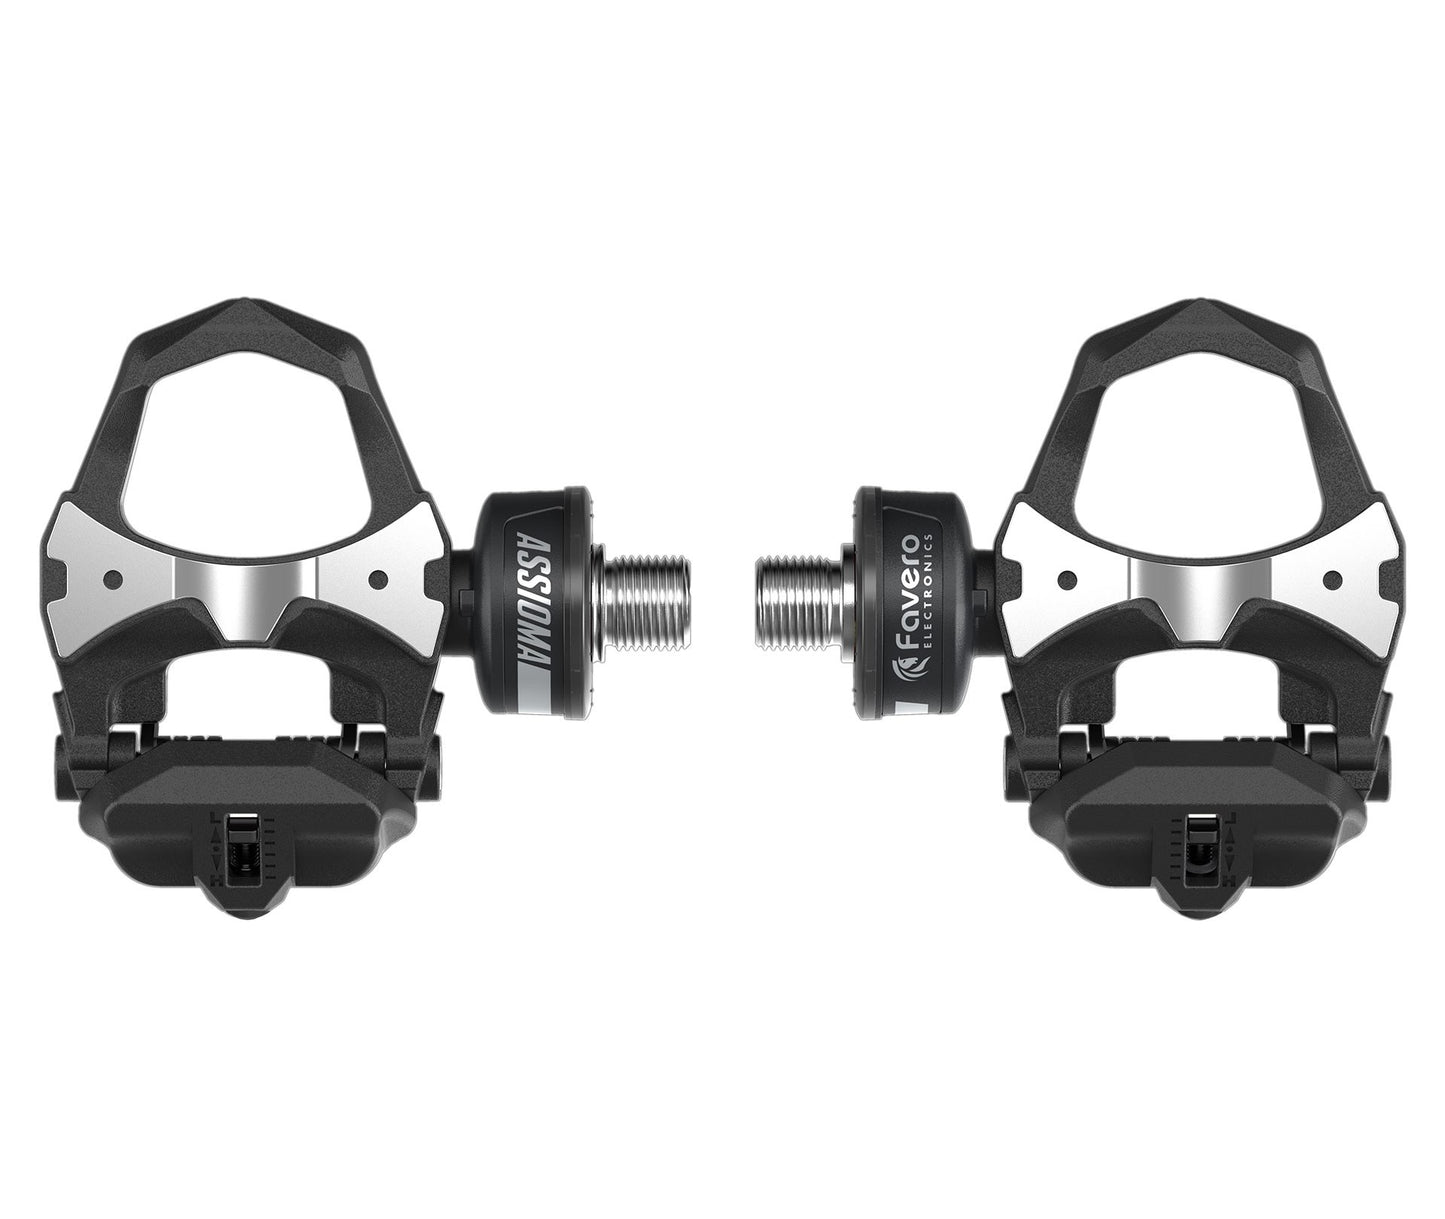 Favero Assioma DUO Dual-Side Pedal-Based Power Meter